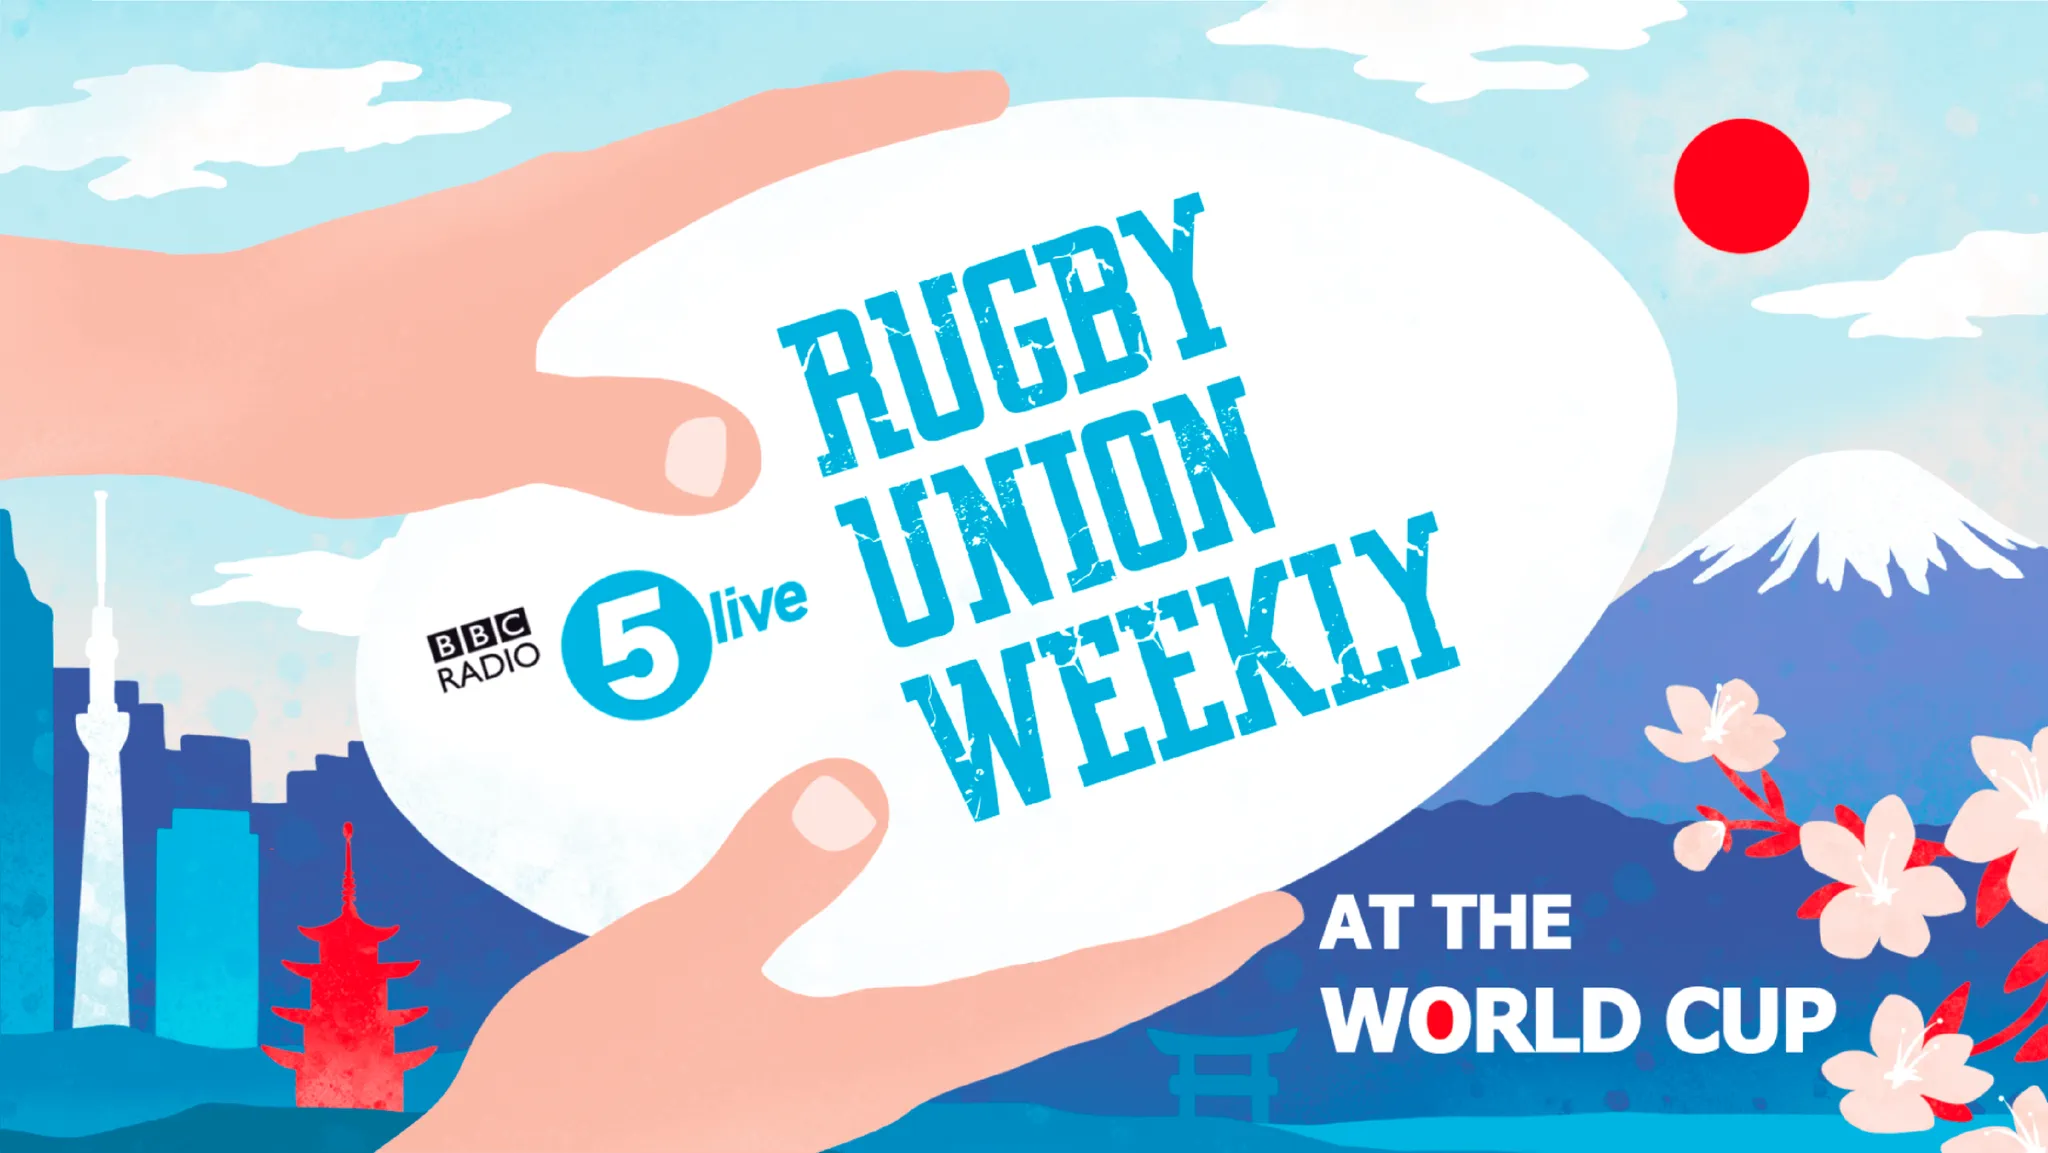 RUGBY UNION WEEKLY feature image (by Emilia Schneider)